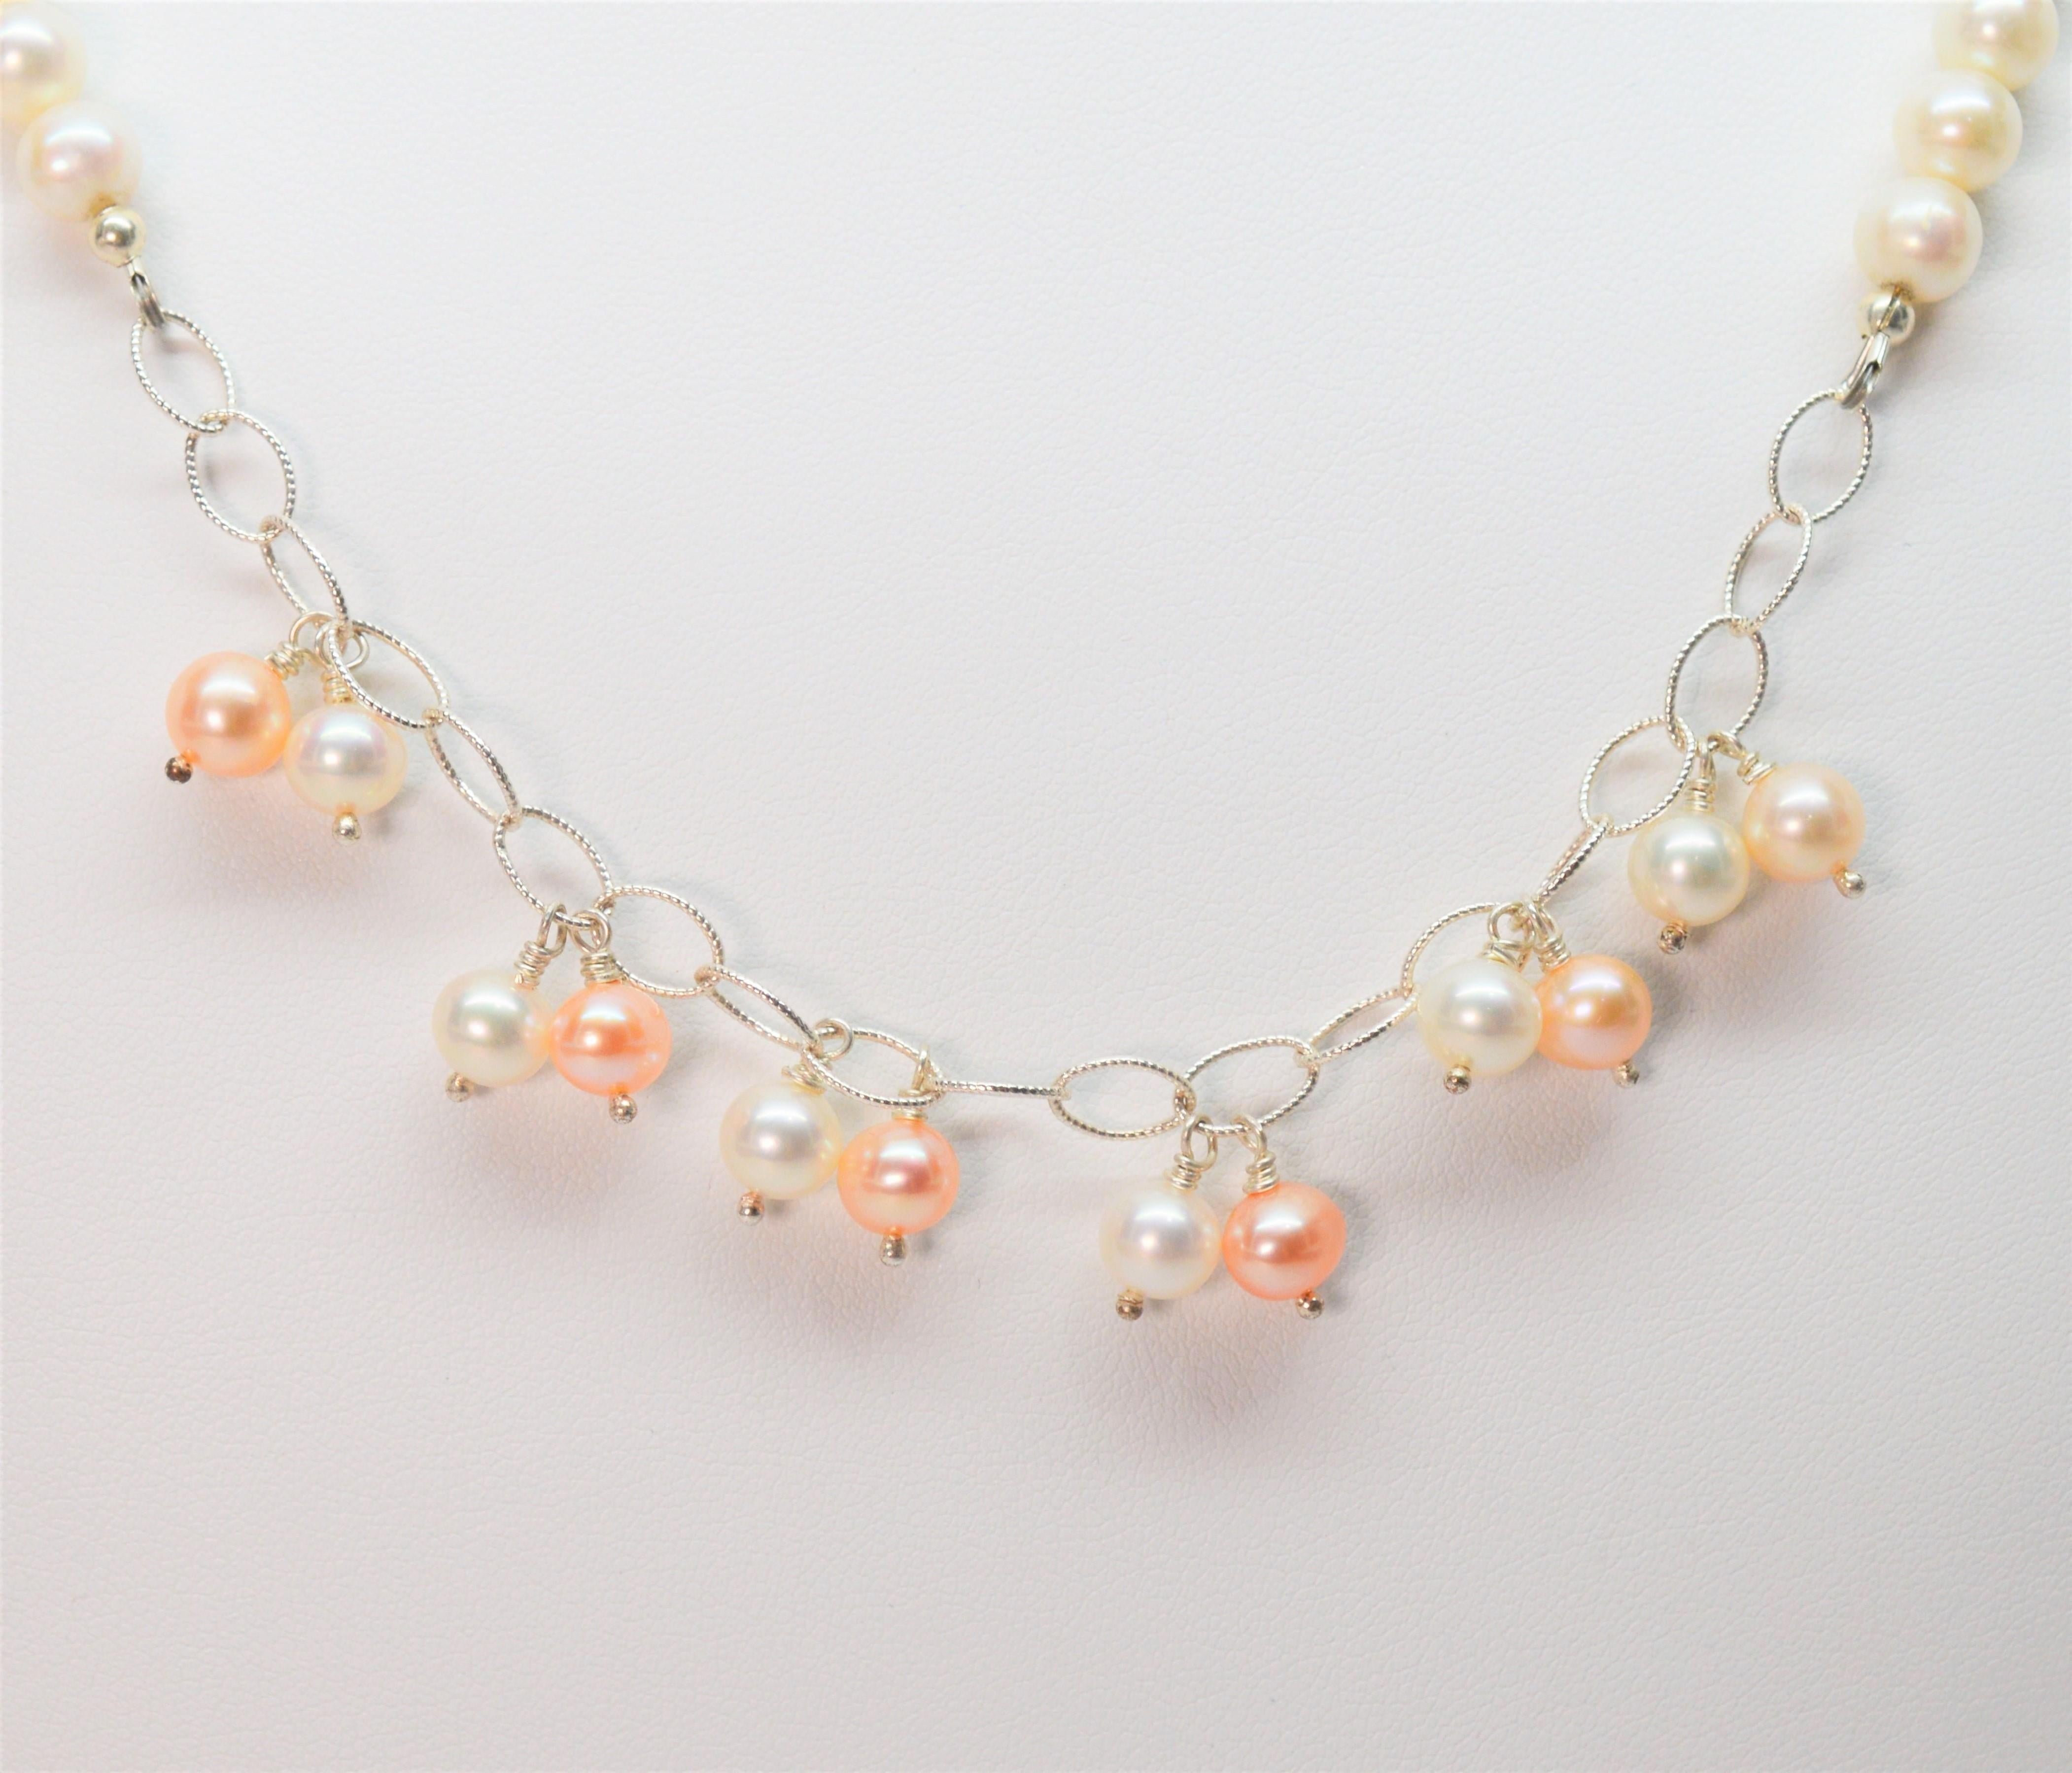 Fresh as a spring rain, this darling artisan made necklace elevates the classic pearl strand with textured oval link silver chain and lustrous droplets of blush and white pearls. Created with 6.5 mm cultured Button Akoya Pearls, the necklace